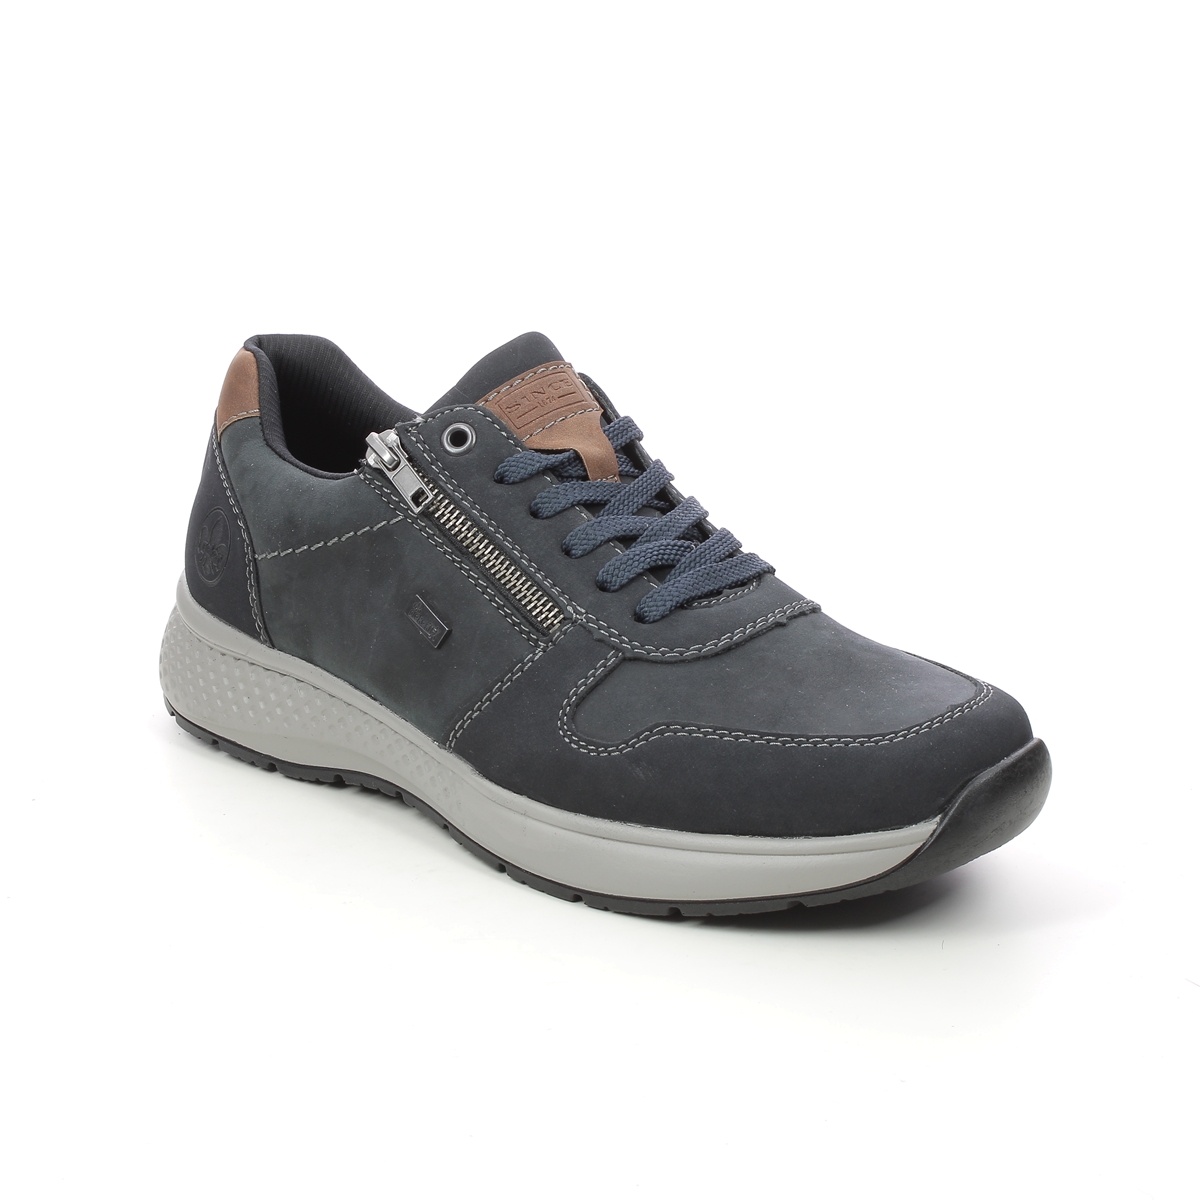 Rieker Delson Zip Tex Navy Leather Mens Comfort Shoes B7613-14 In Size 46 In Plain Navy Leather